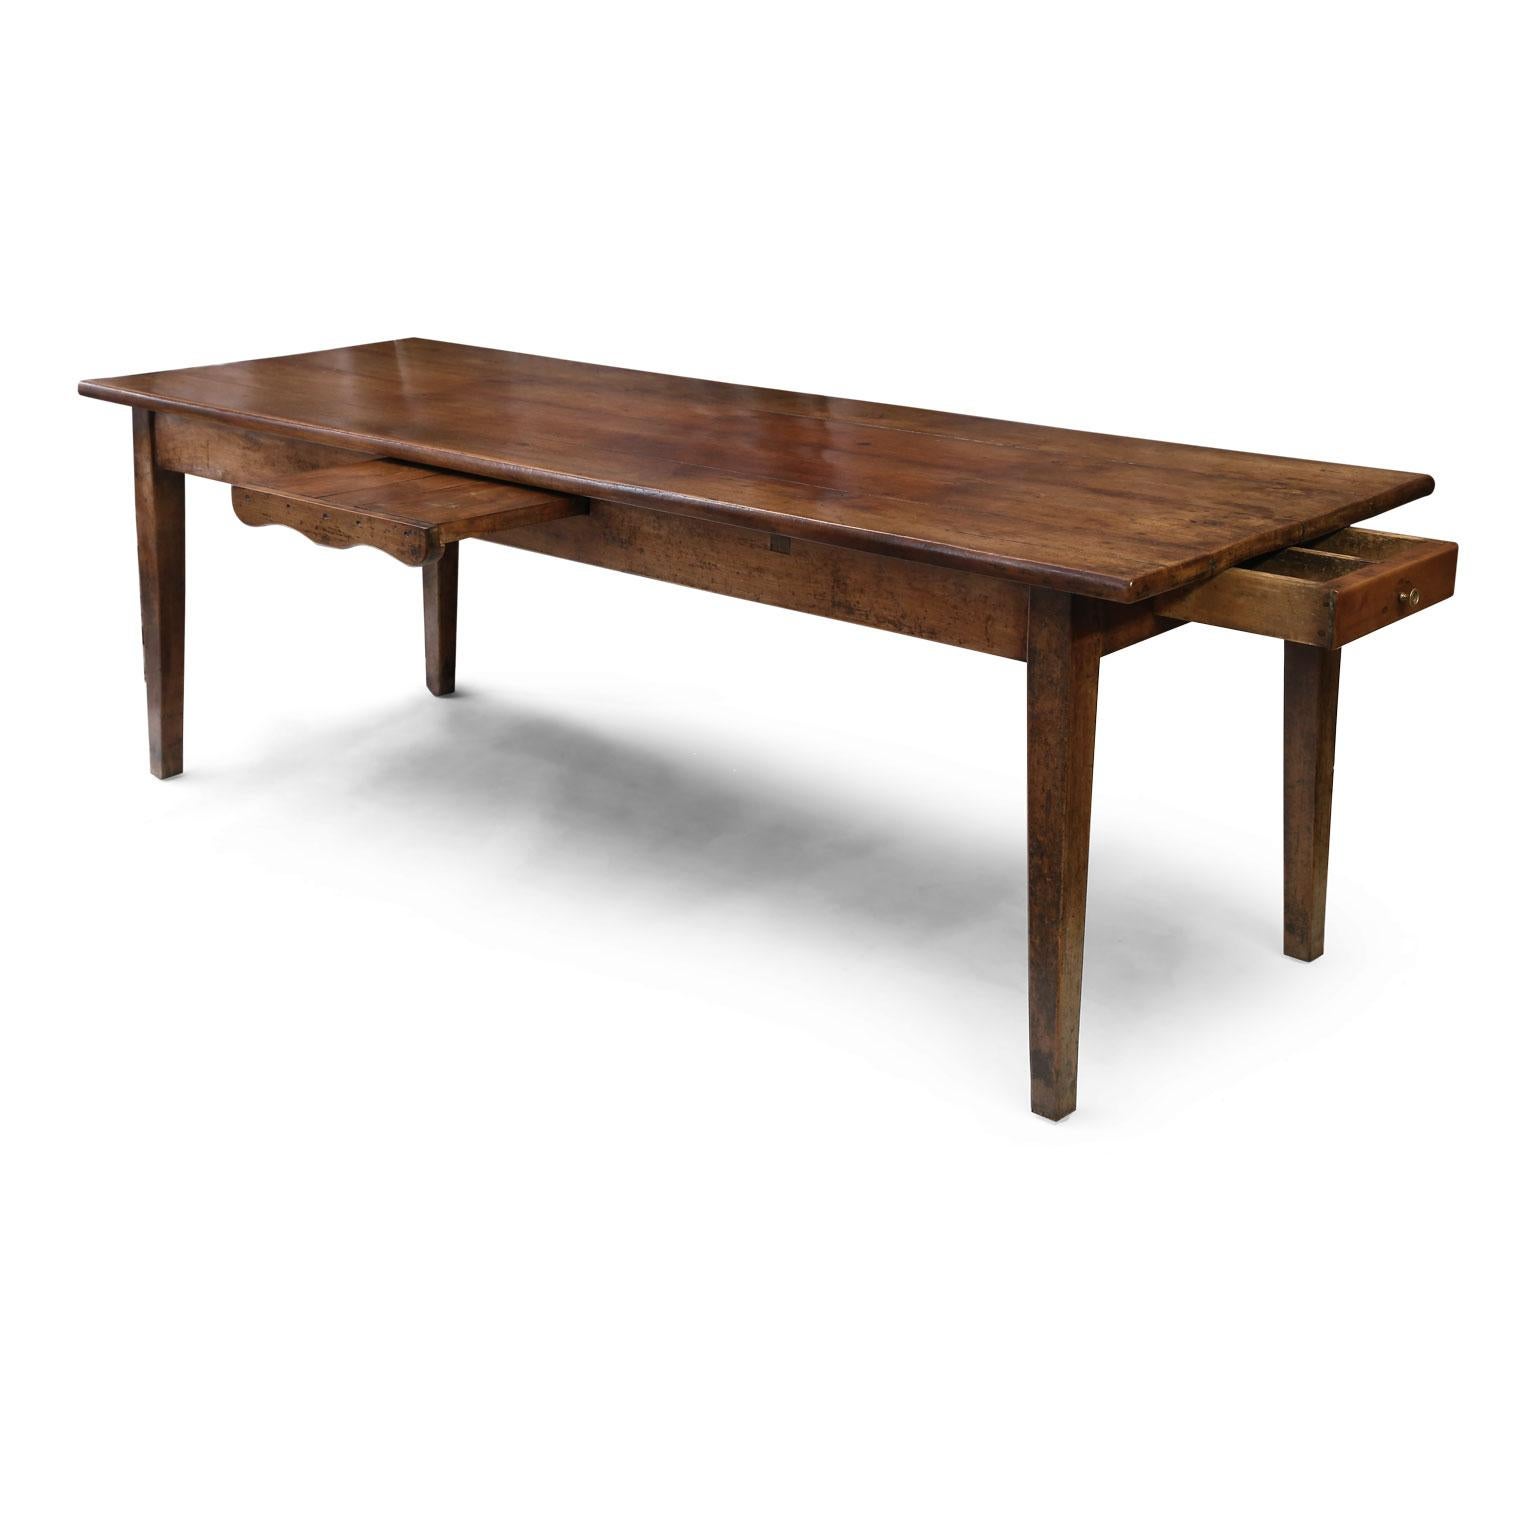 French walnut dining table, originally used as both a dining and work table on a farm. Drawer opens at one end and a cutting board pulls out from the side of table. Constructed circa 1850-1880 from walnut with mortise and Tenon joints this table is